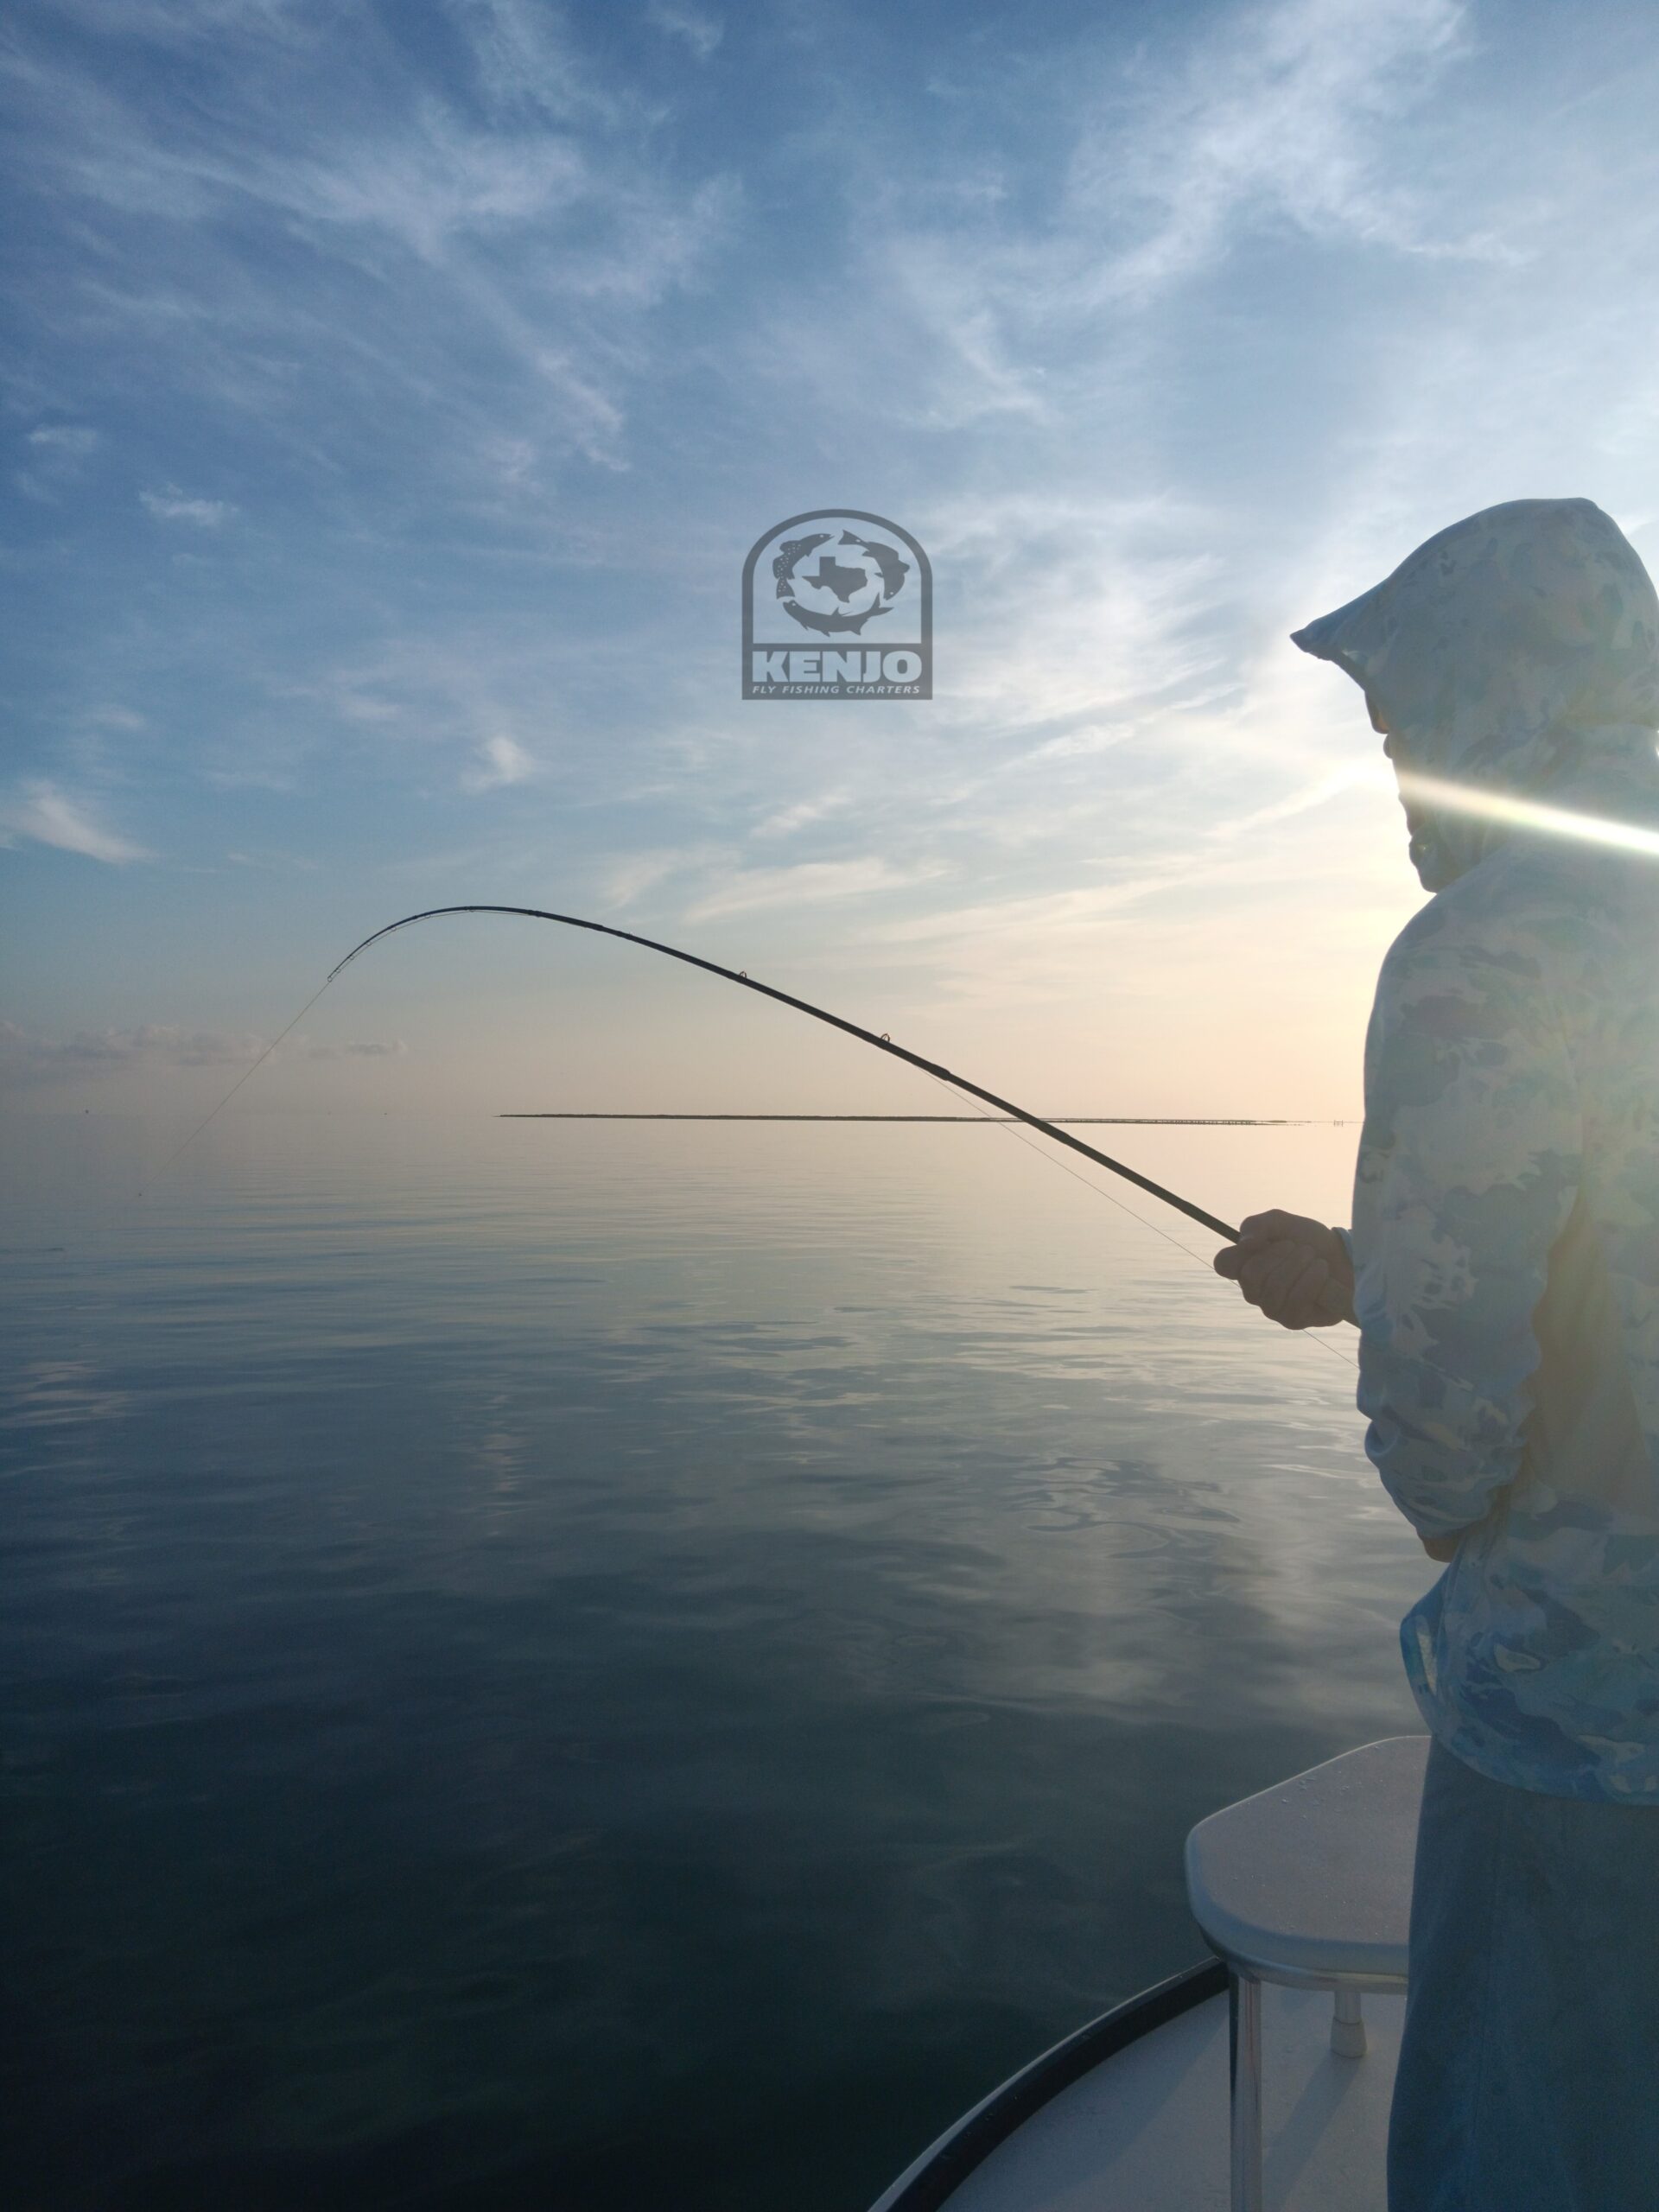 YETI Offshore Fishing - Shop By Activity